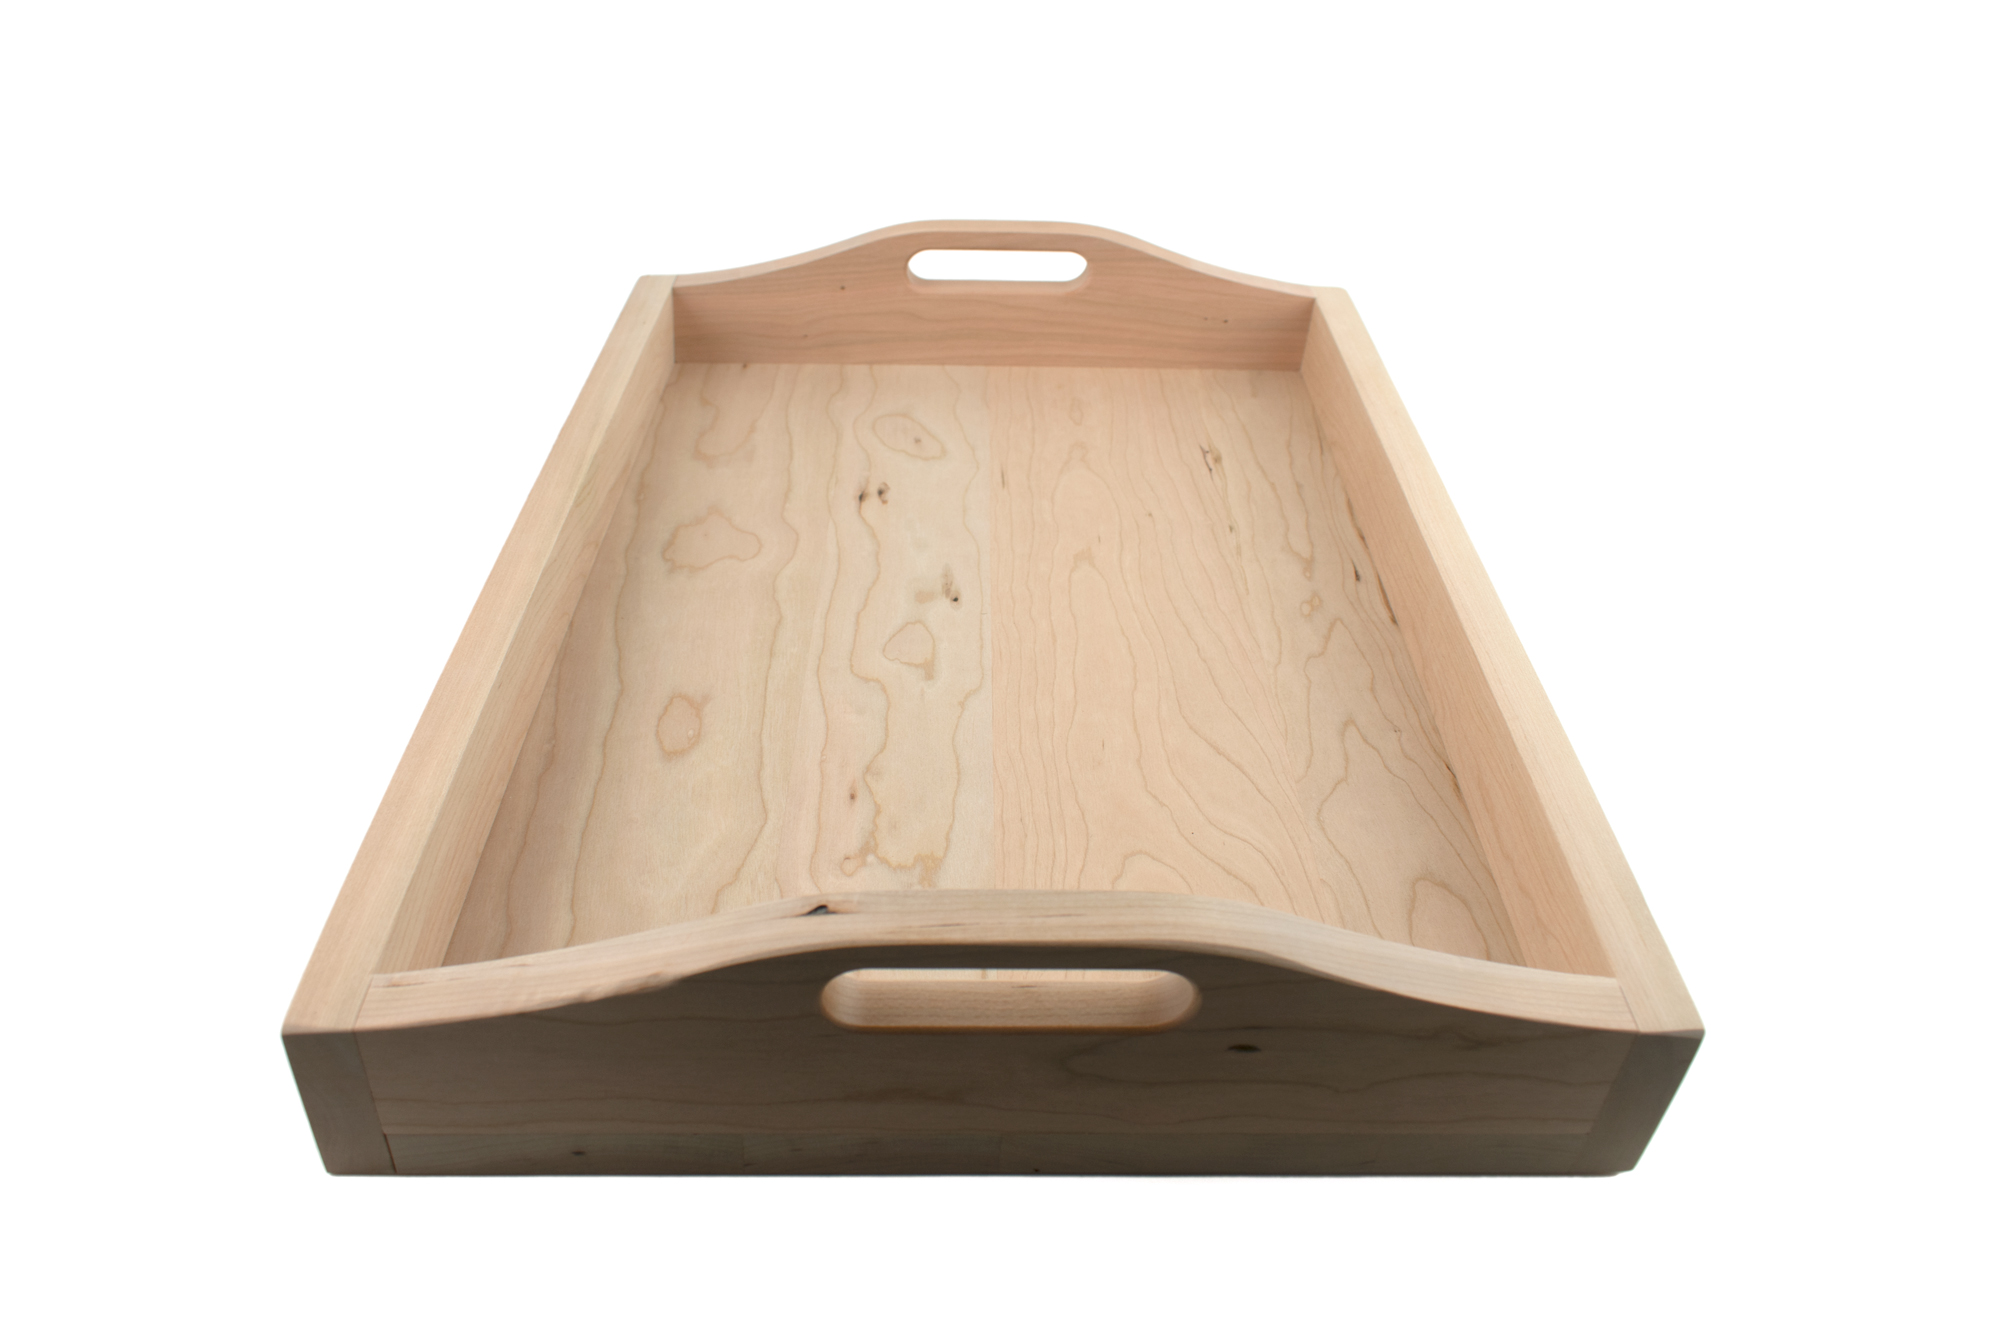 Large Cherry Hardwood Tray with Handles